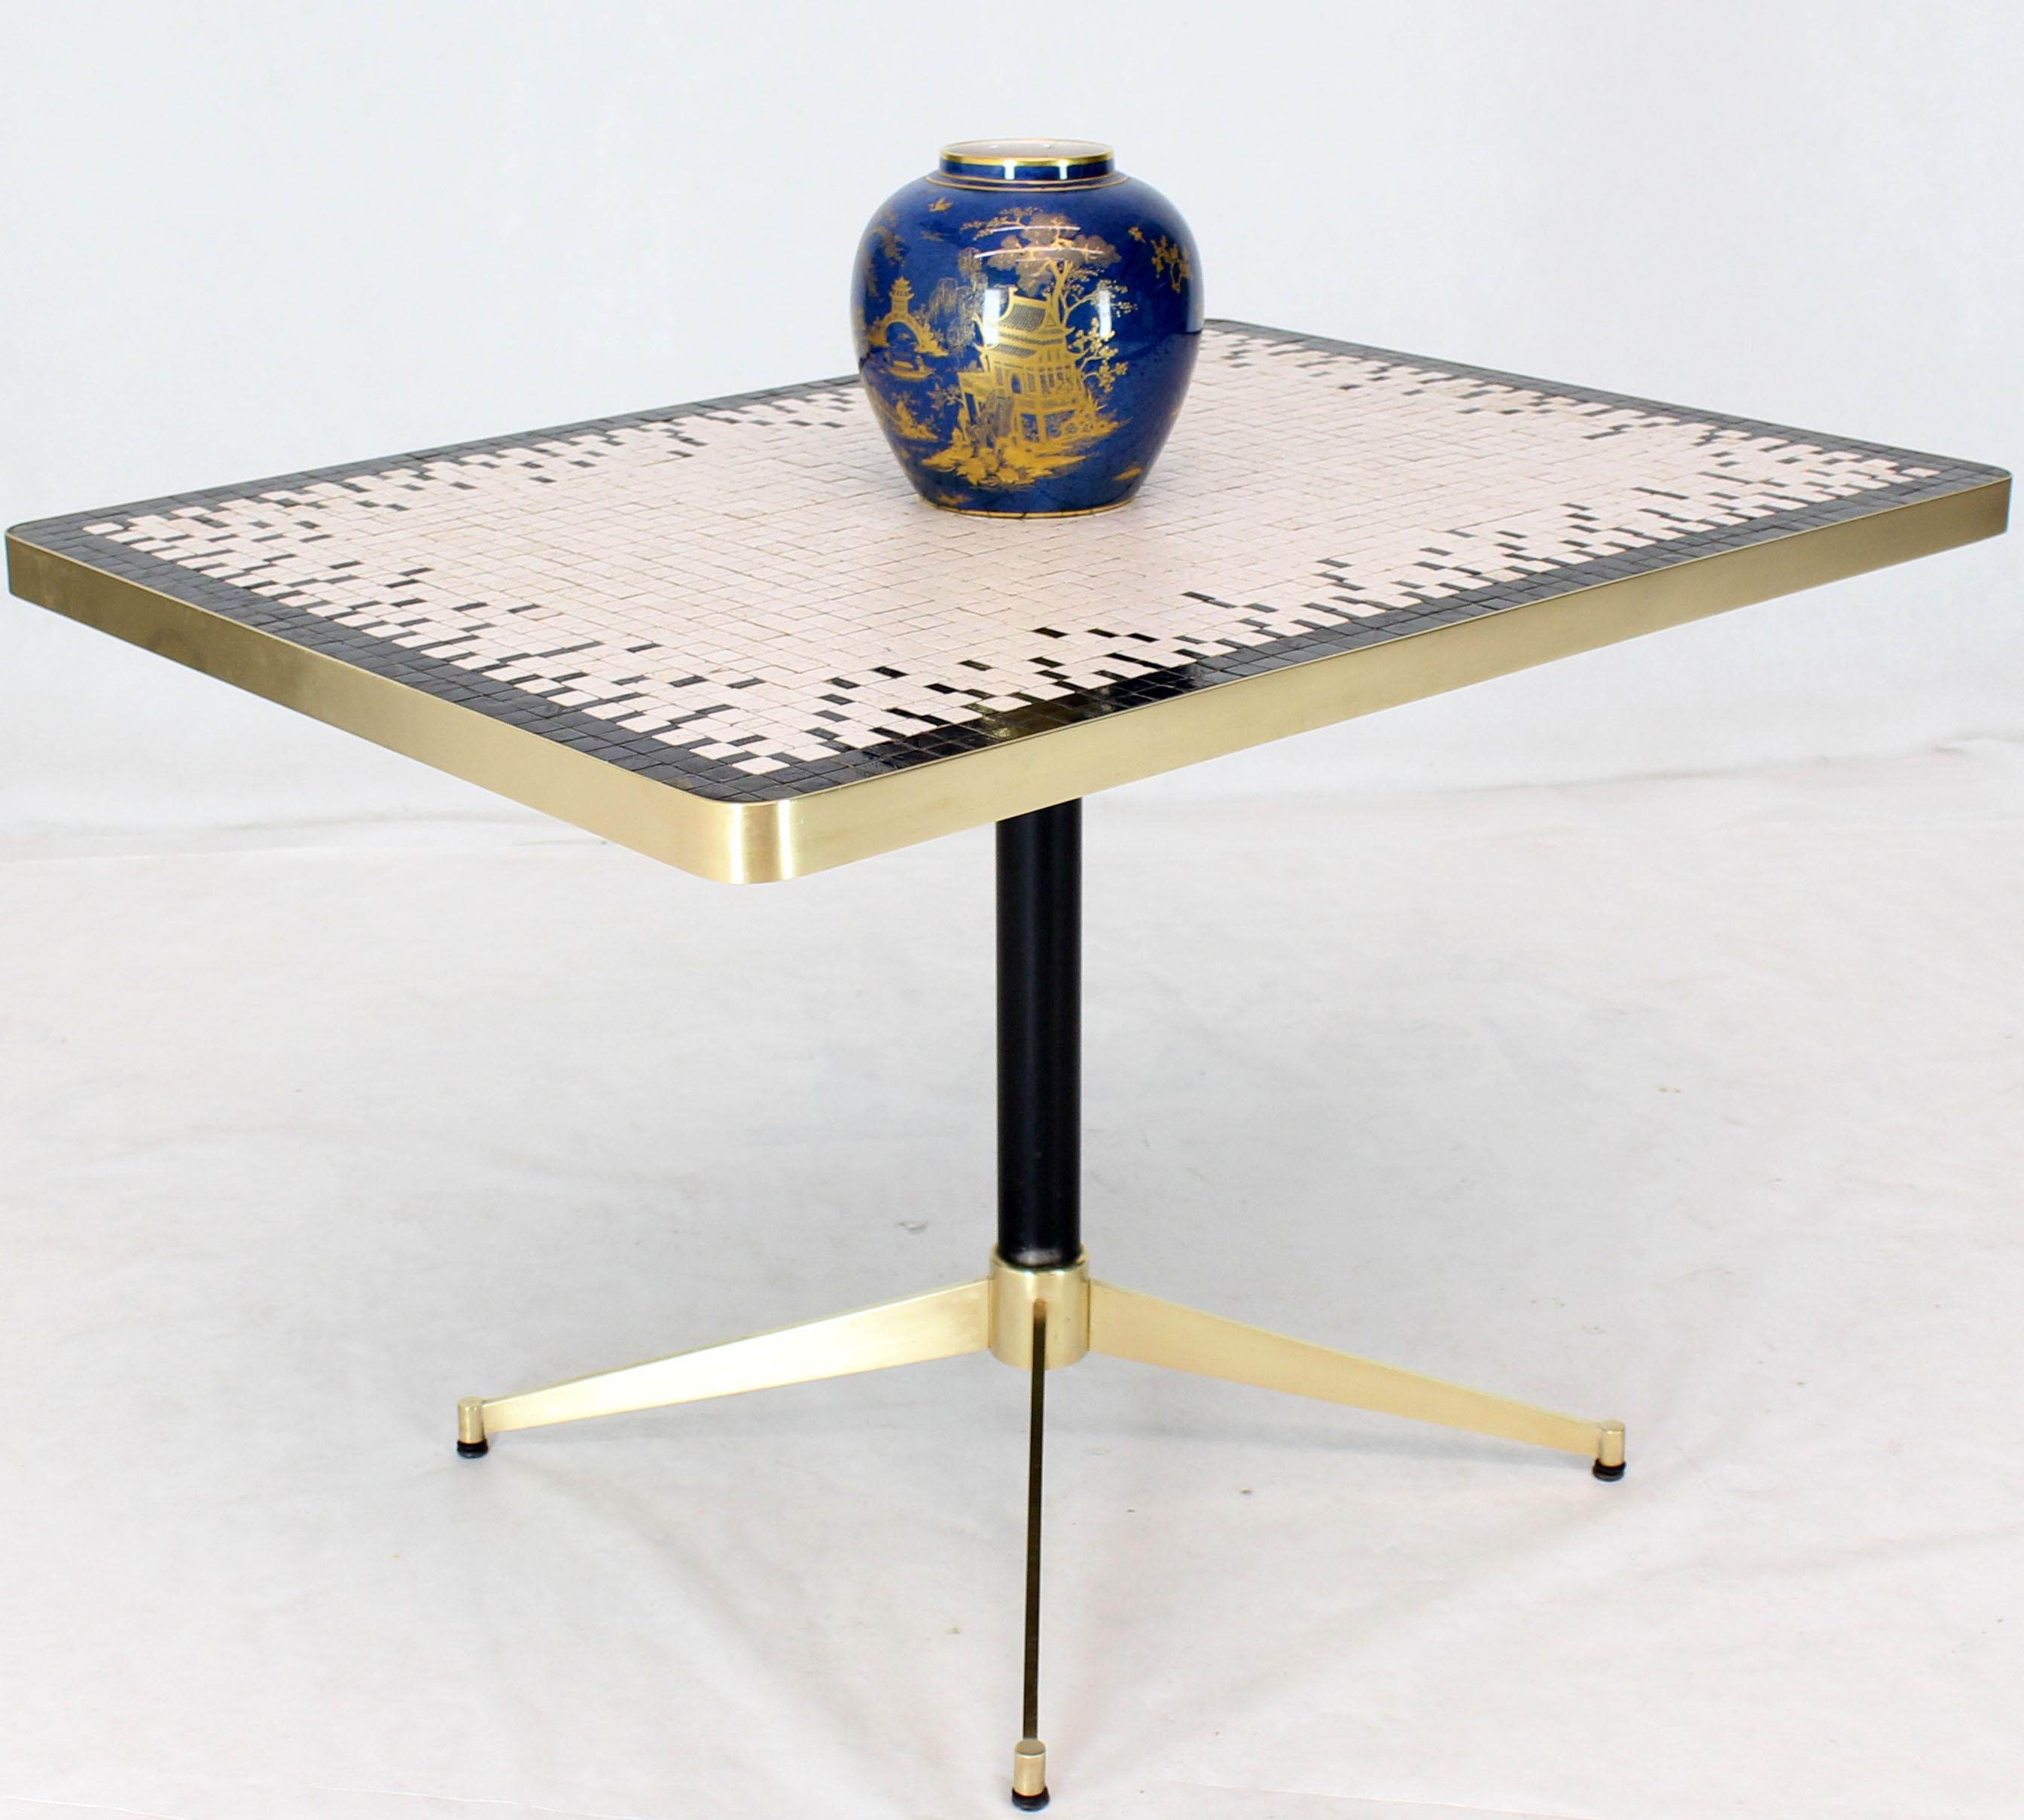 Machined Solid Brass X-Shape Base Mosaic Top Cafe Table In Excellent Condition For Sale In Rockaway, NJ